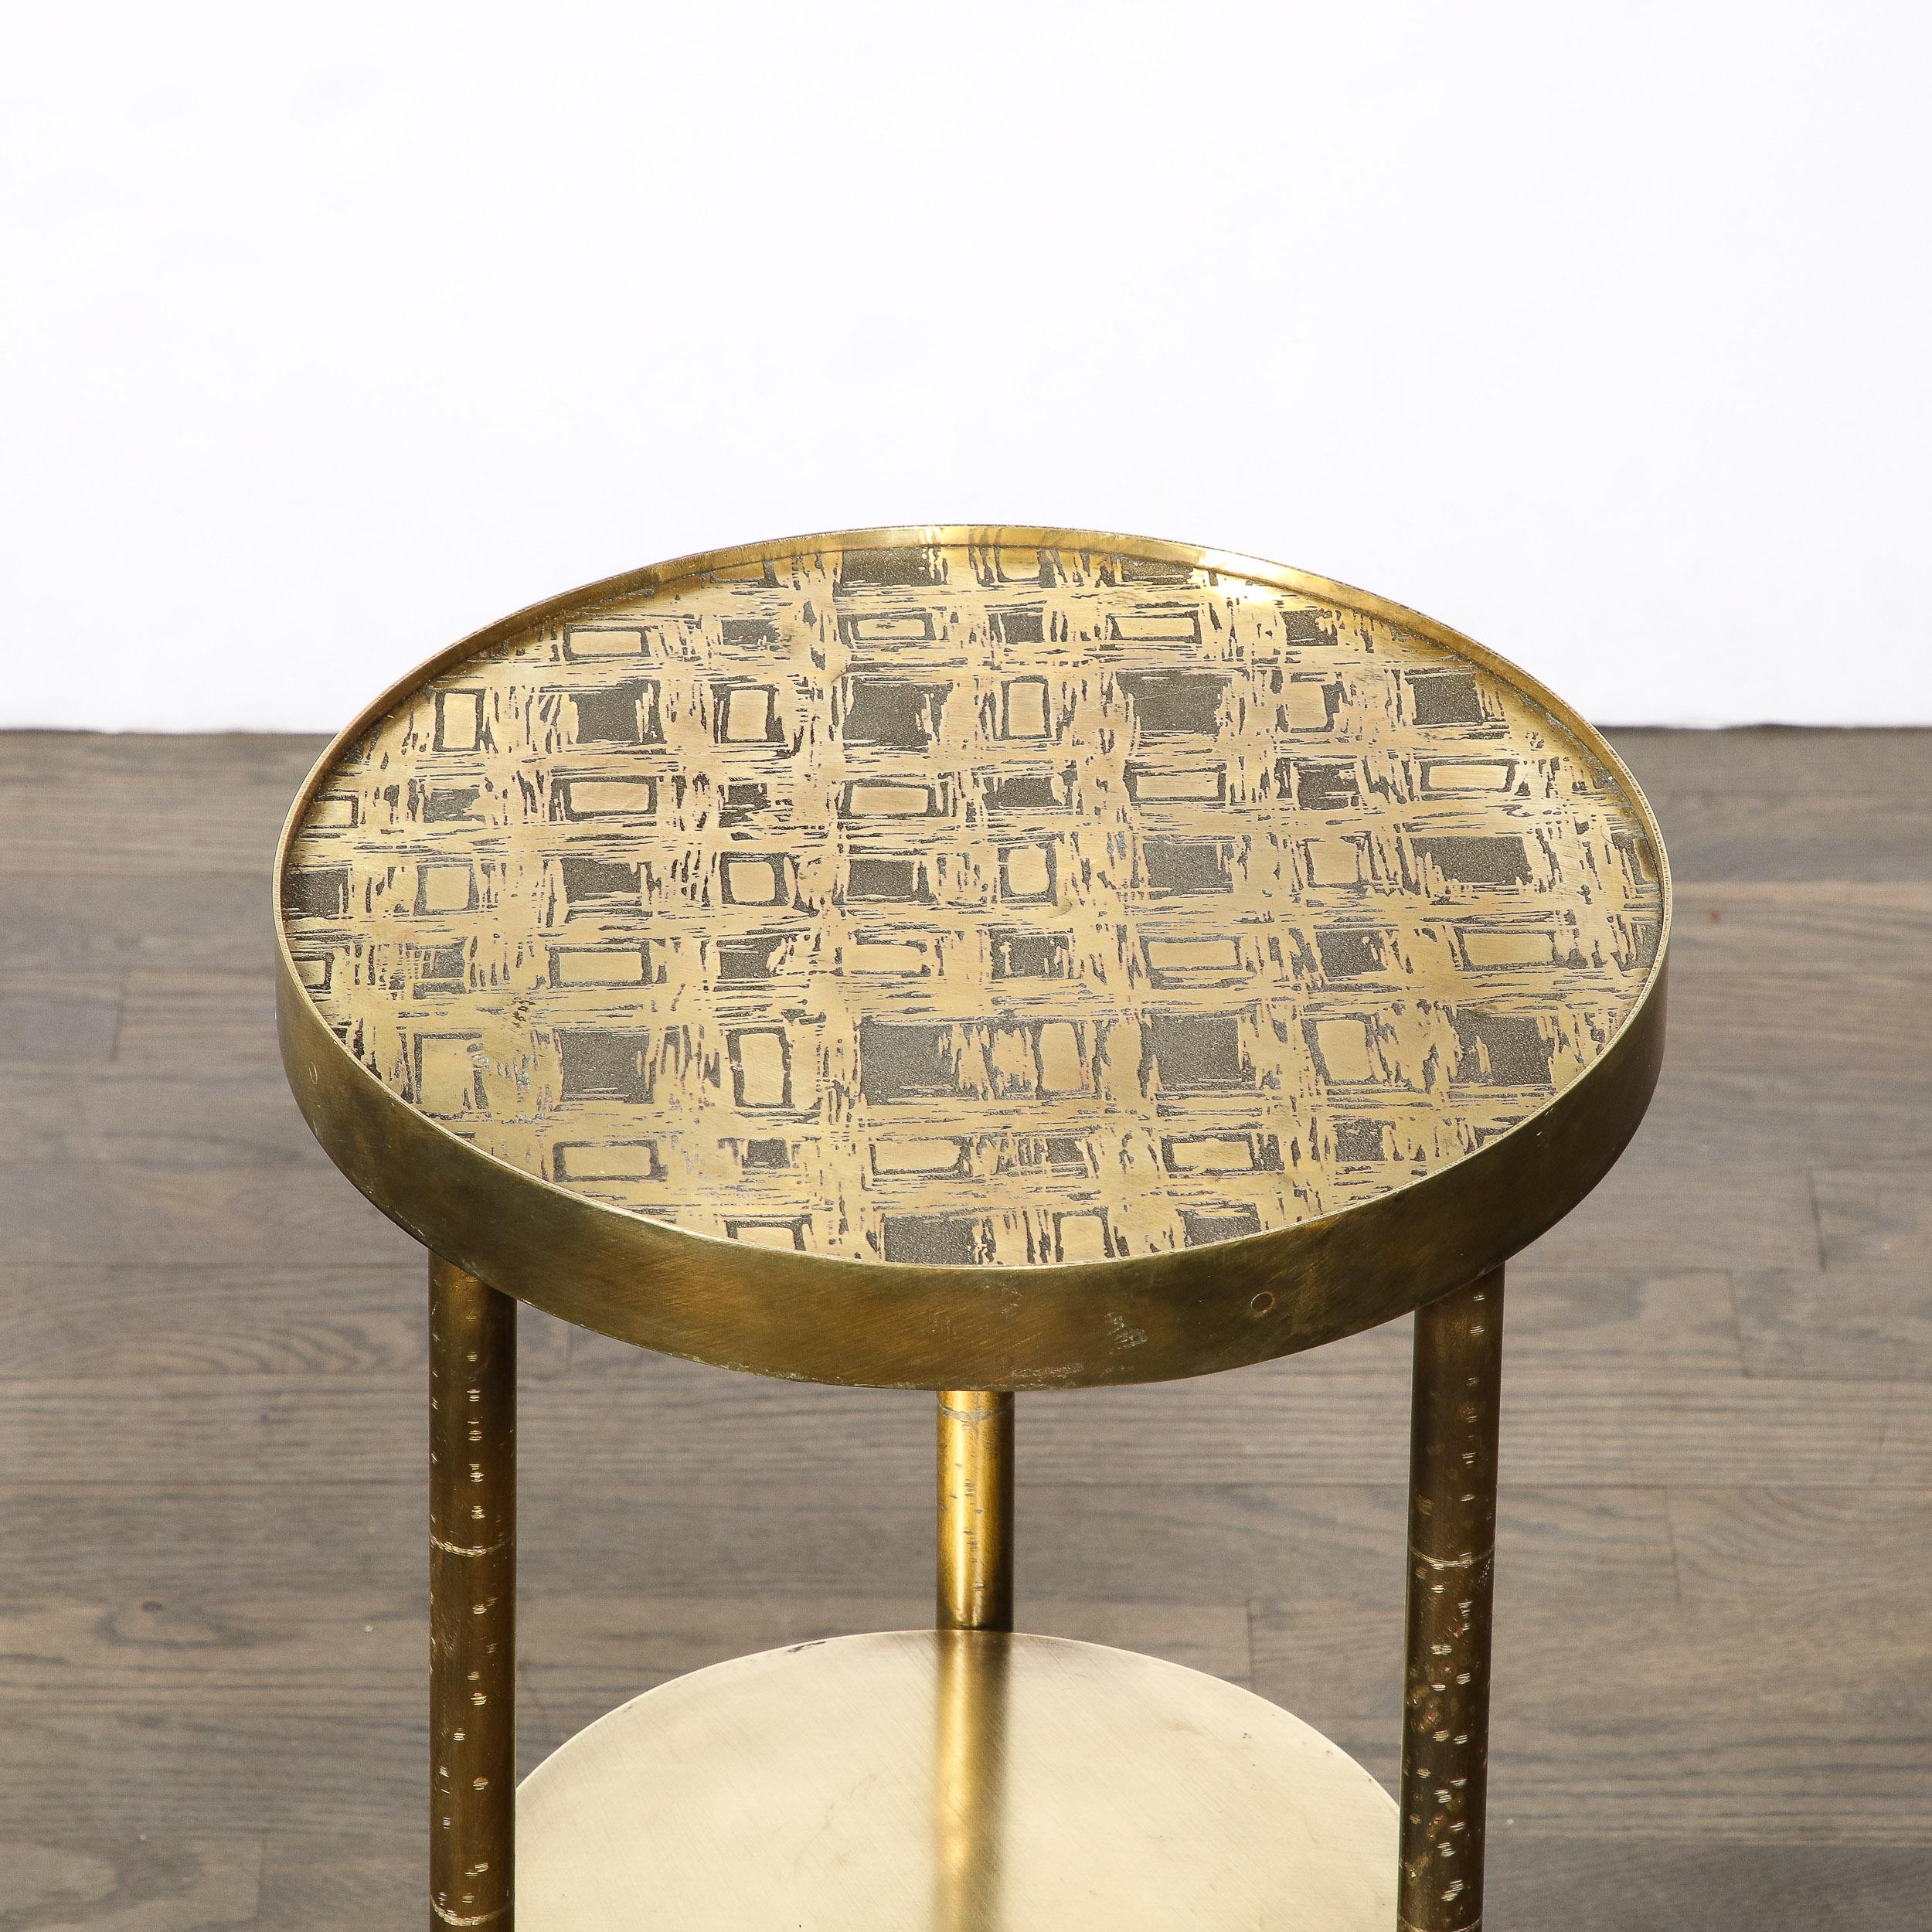 This beautiful and refined Mid-Century Modern end table was realized by the esteemed Philip Laverne in the United States circa 1960. It features two circular tiers and three legs all in patinated bronze. The top of the table offers an organic